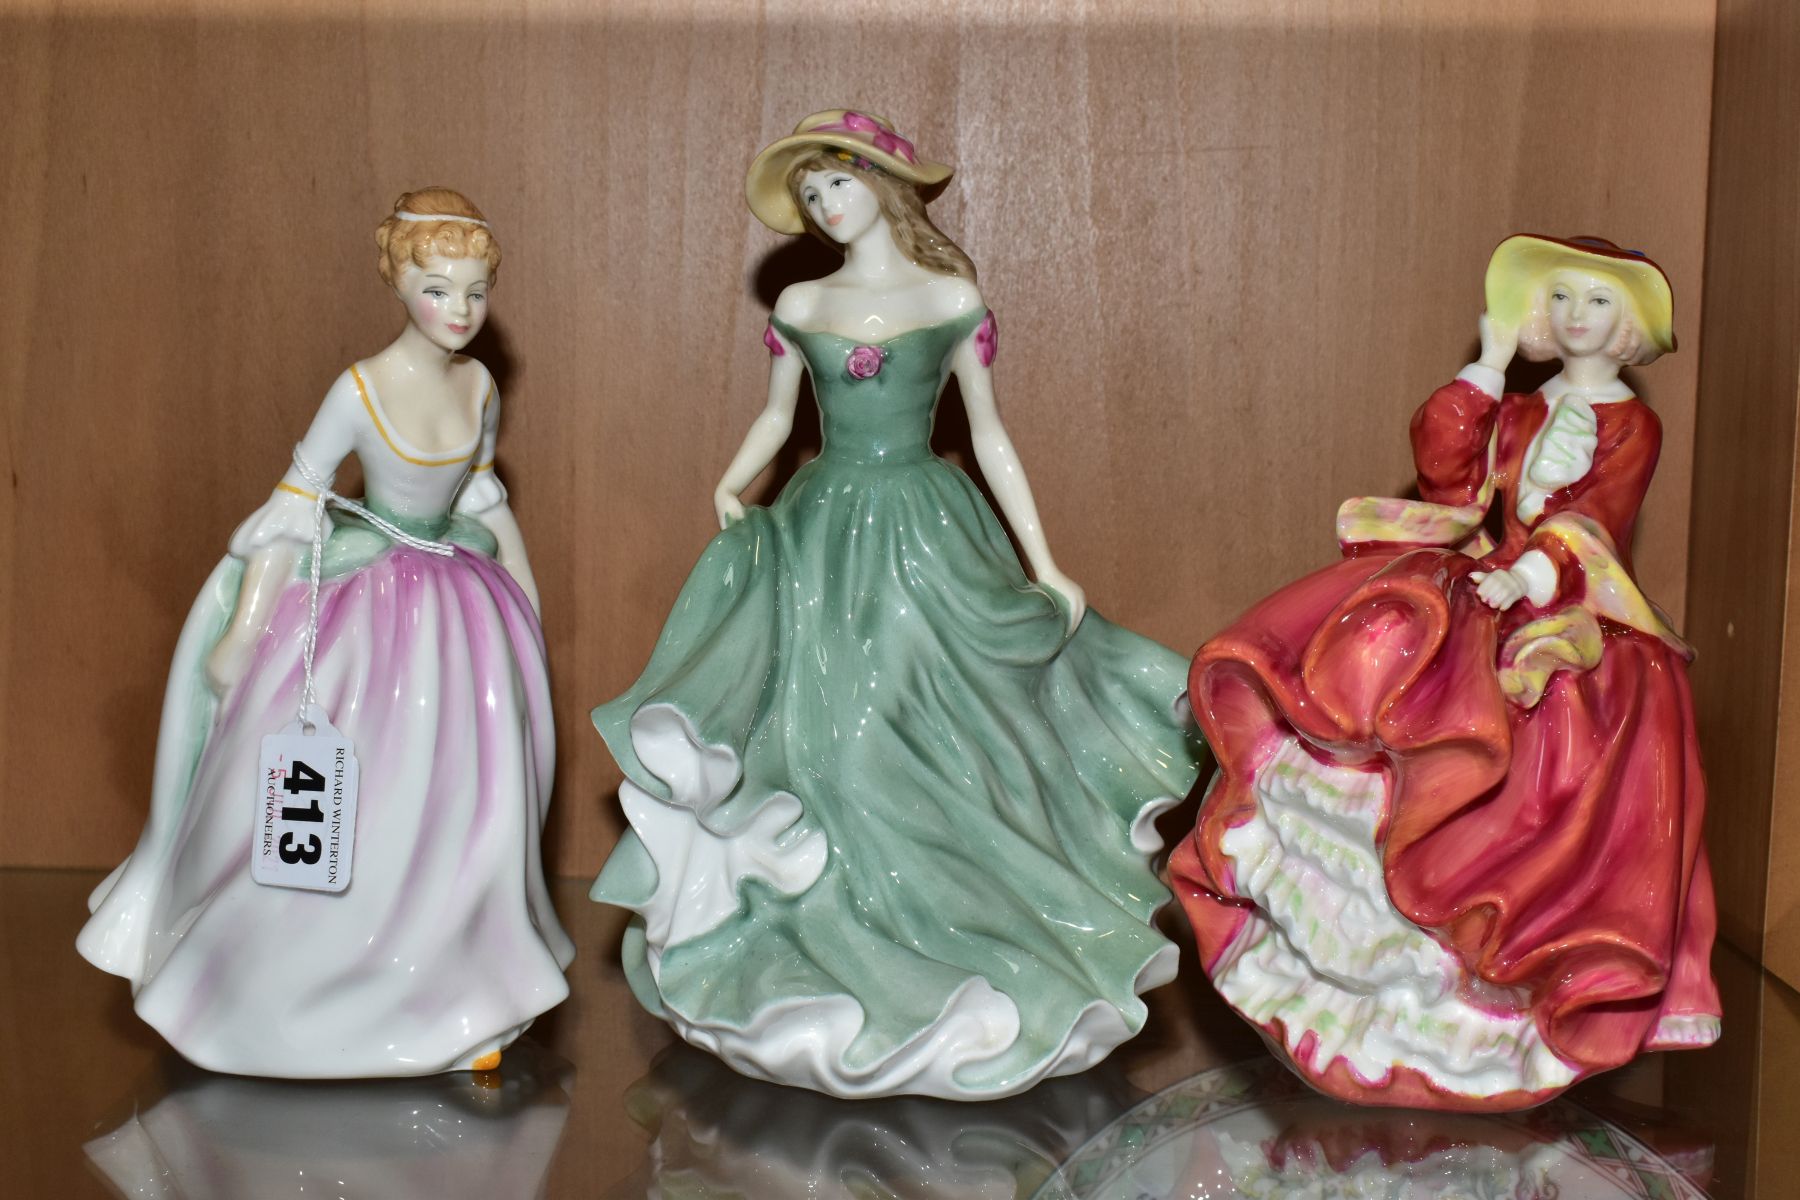 THREE ROYAL DOULTON LADY FIGURES, comprising 'Alison' HN3264, 'Best Wishes' HN3971 and 'Top O' The